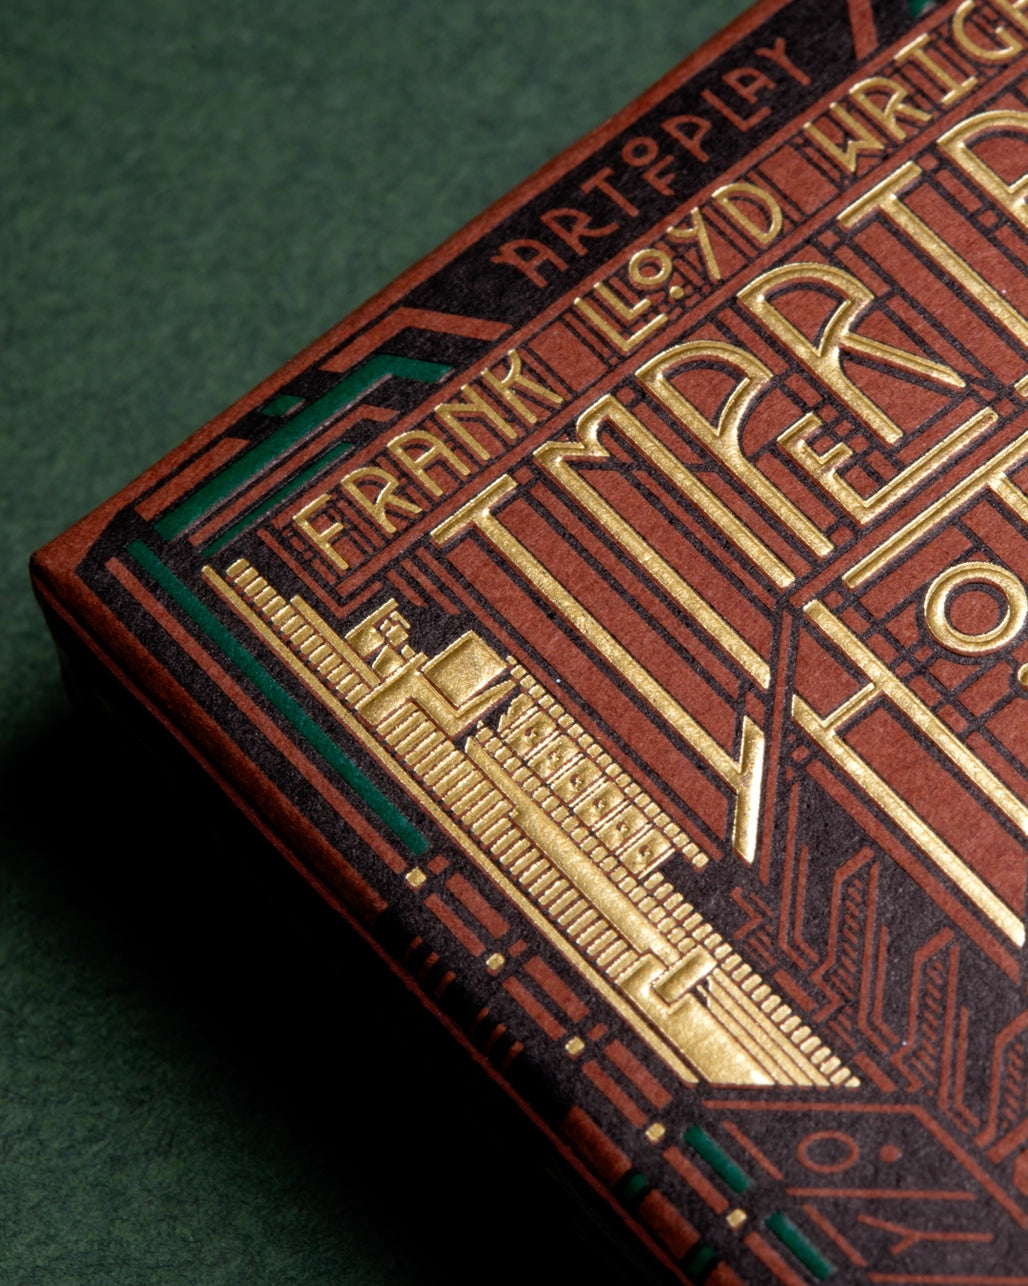 Frank Lloyd Wright Imperial Hotel Playing Cards